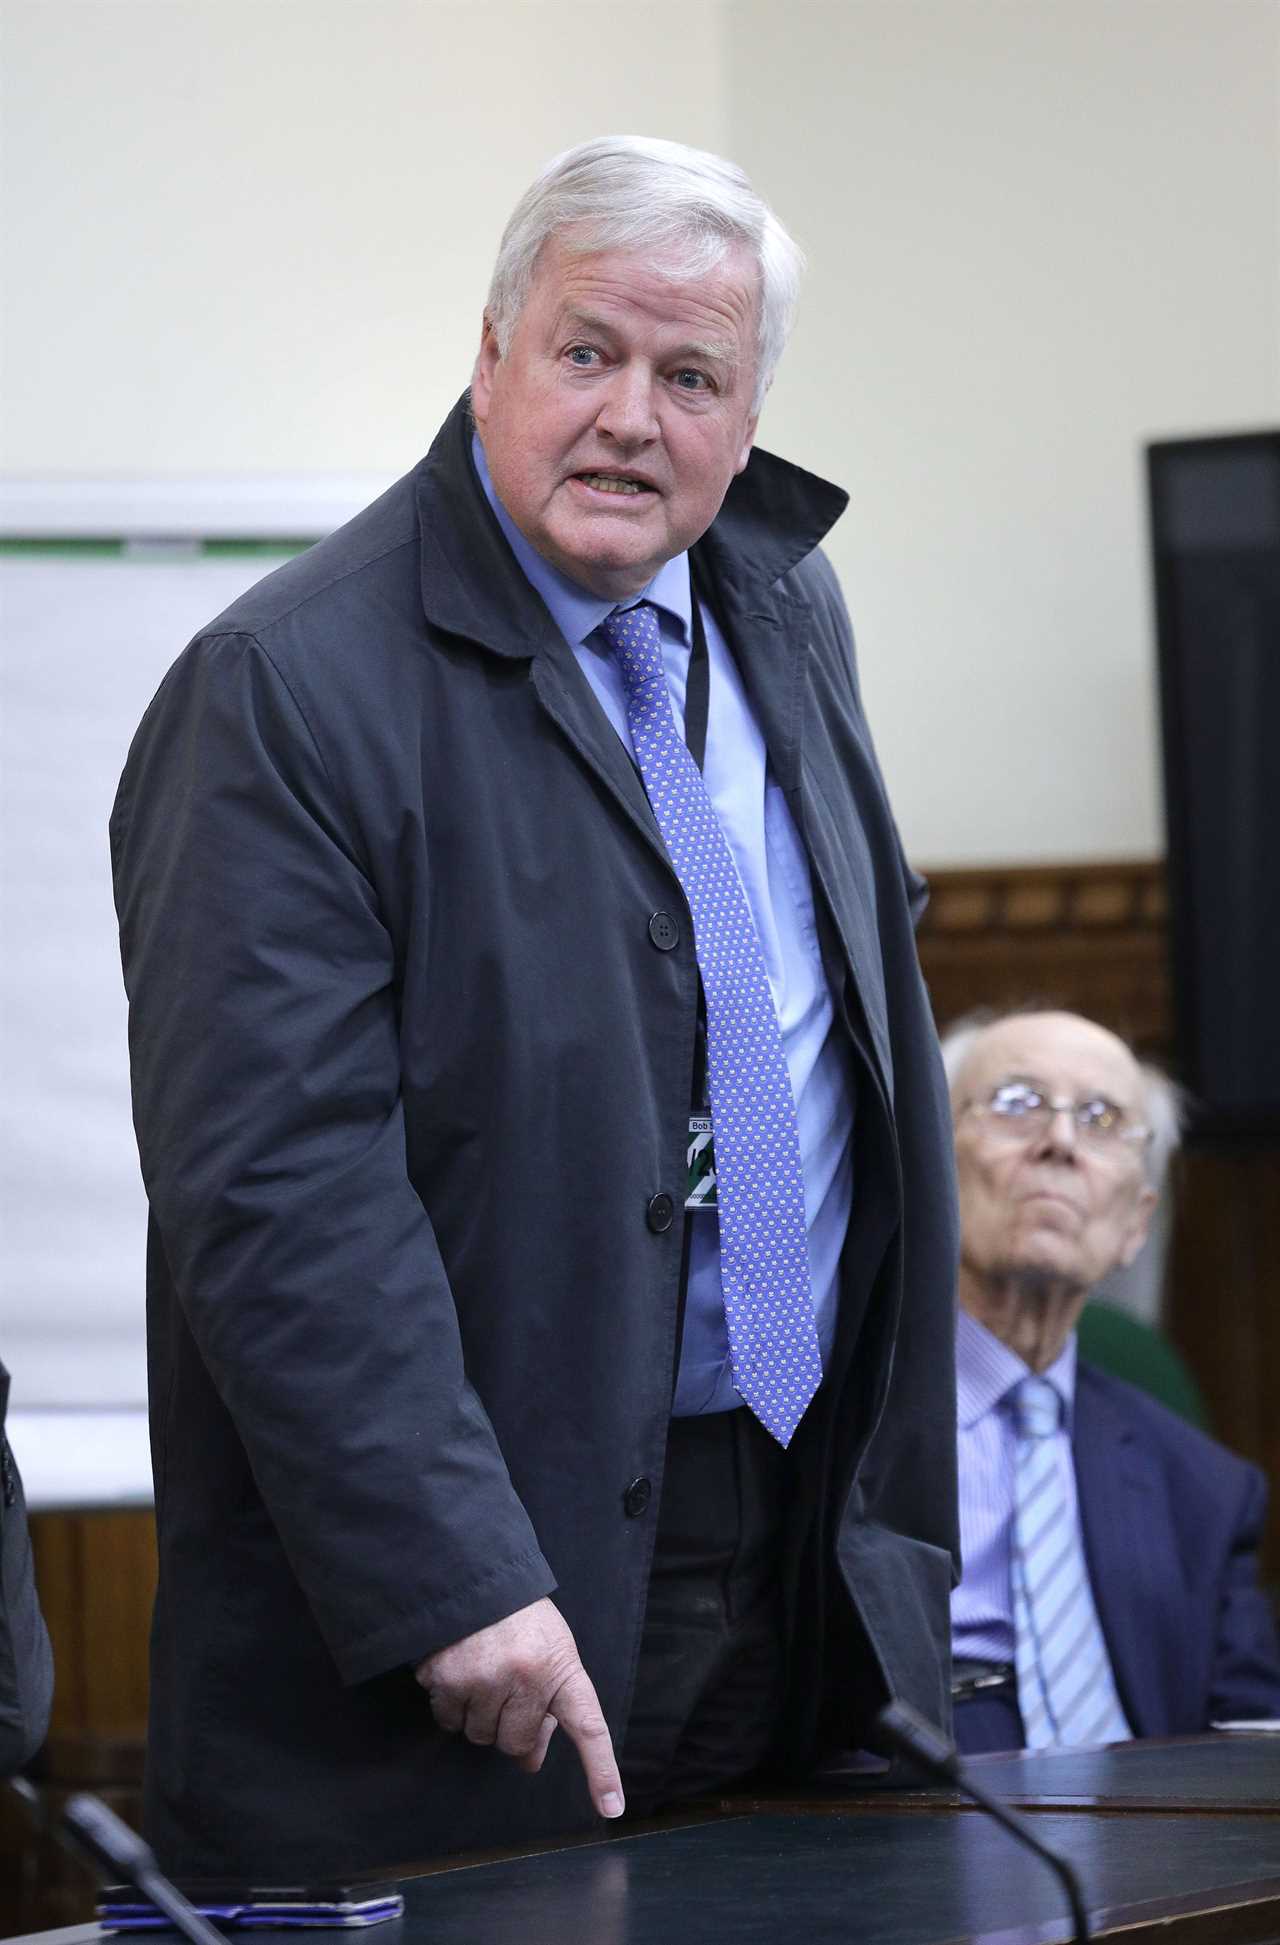 MP Bob Stewart, 73, charged over ‘racially aggravated abuse’